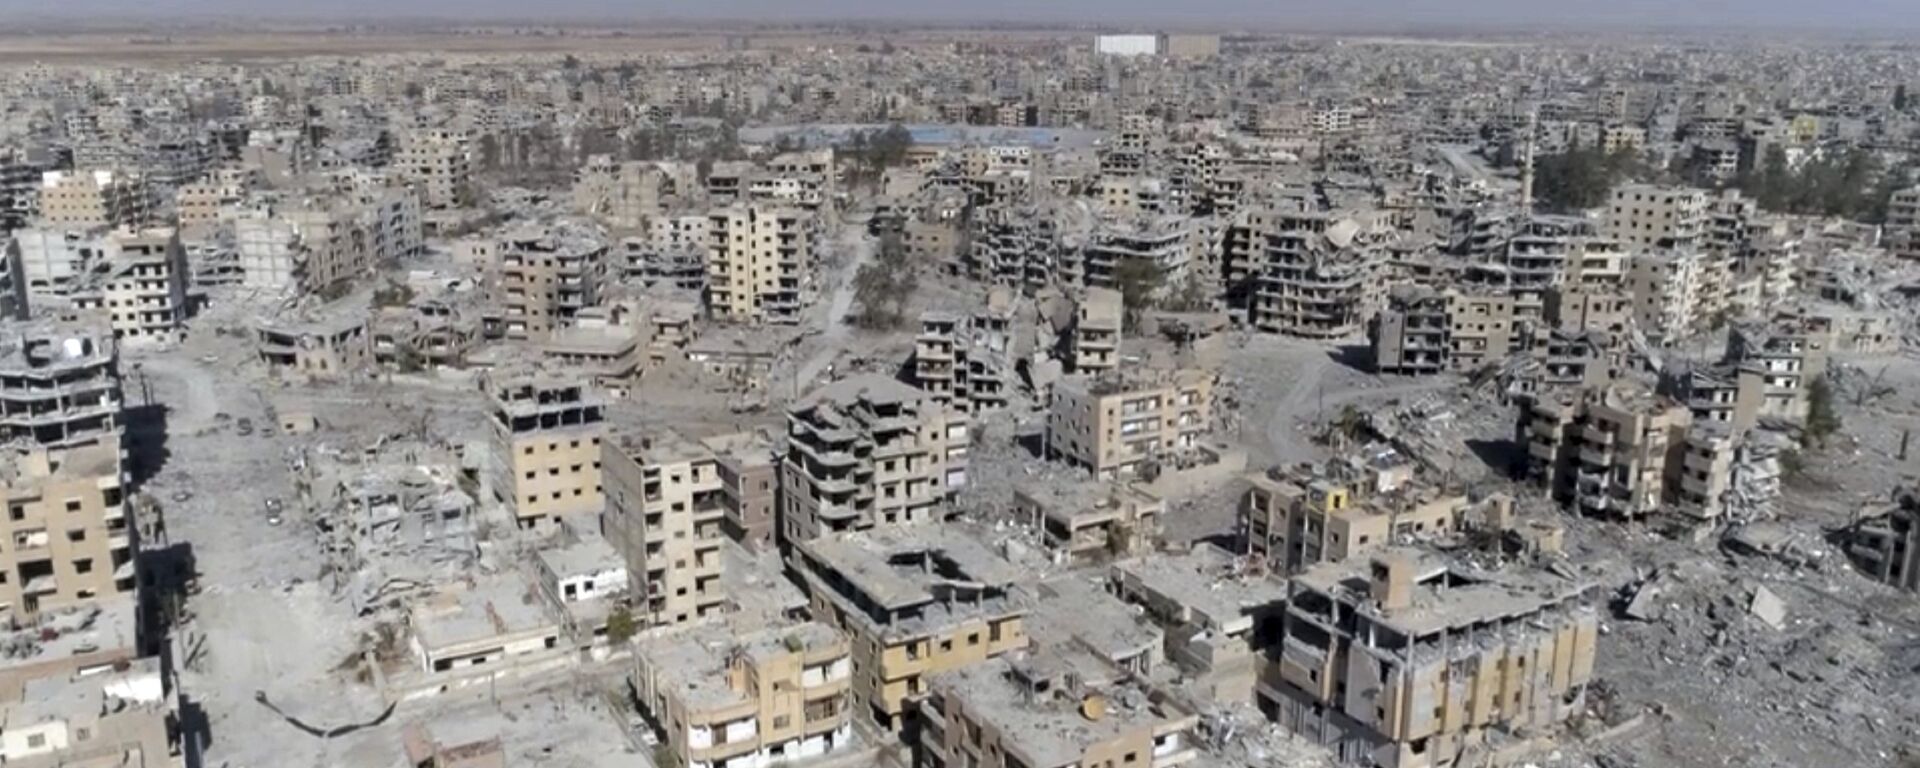 (File) This Thursday, Oct. 19, 2017 frame grab made from drone video shows damaged buildings in Raqqa, Syria - Sputnik International, 1920, 18.04.2022